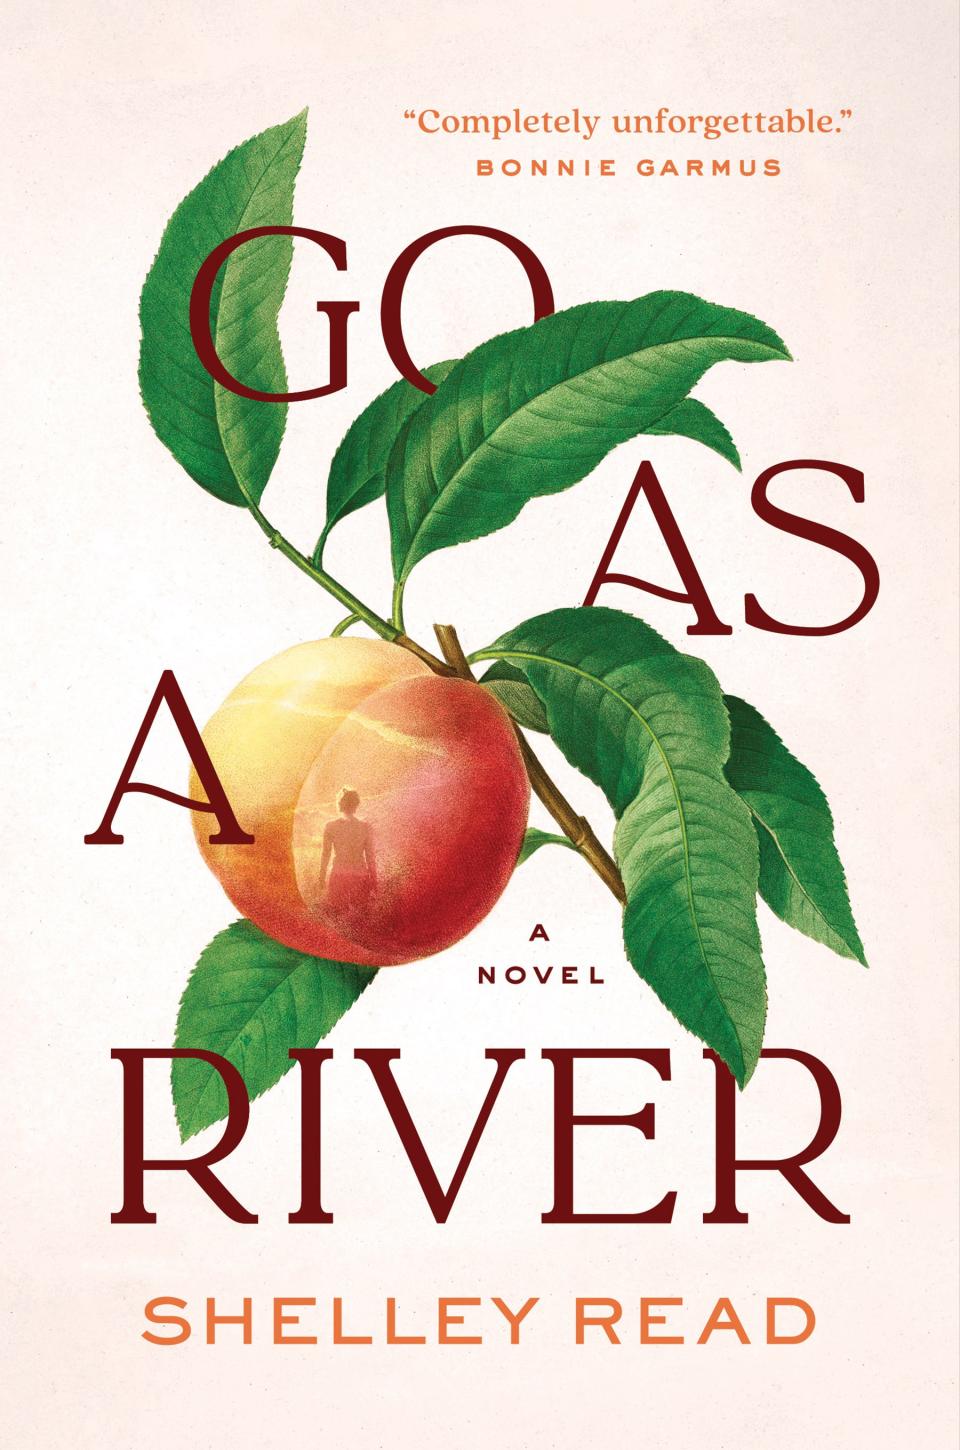 Shelley Read, whose debut novel is "Go As a River," wiill speak in the Collier Friends of the Library's Author Spotlight Event on Thursday, Oct. 26, 2023, at The Norris Center in Naples.